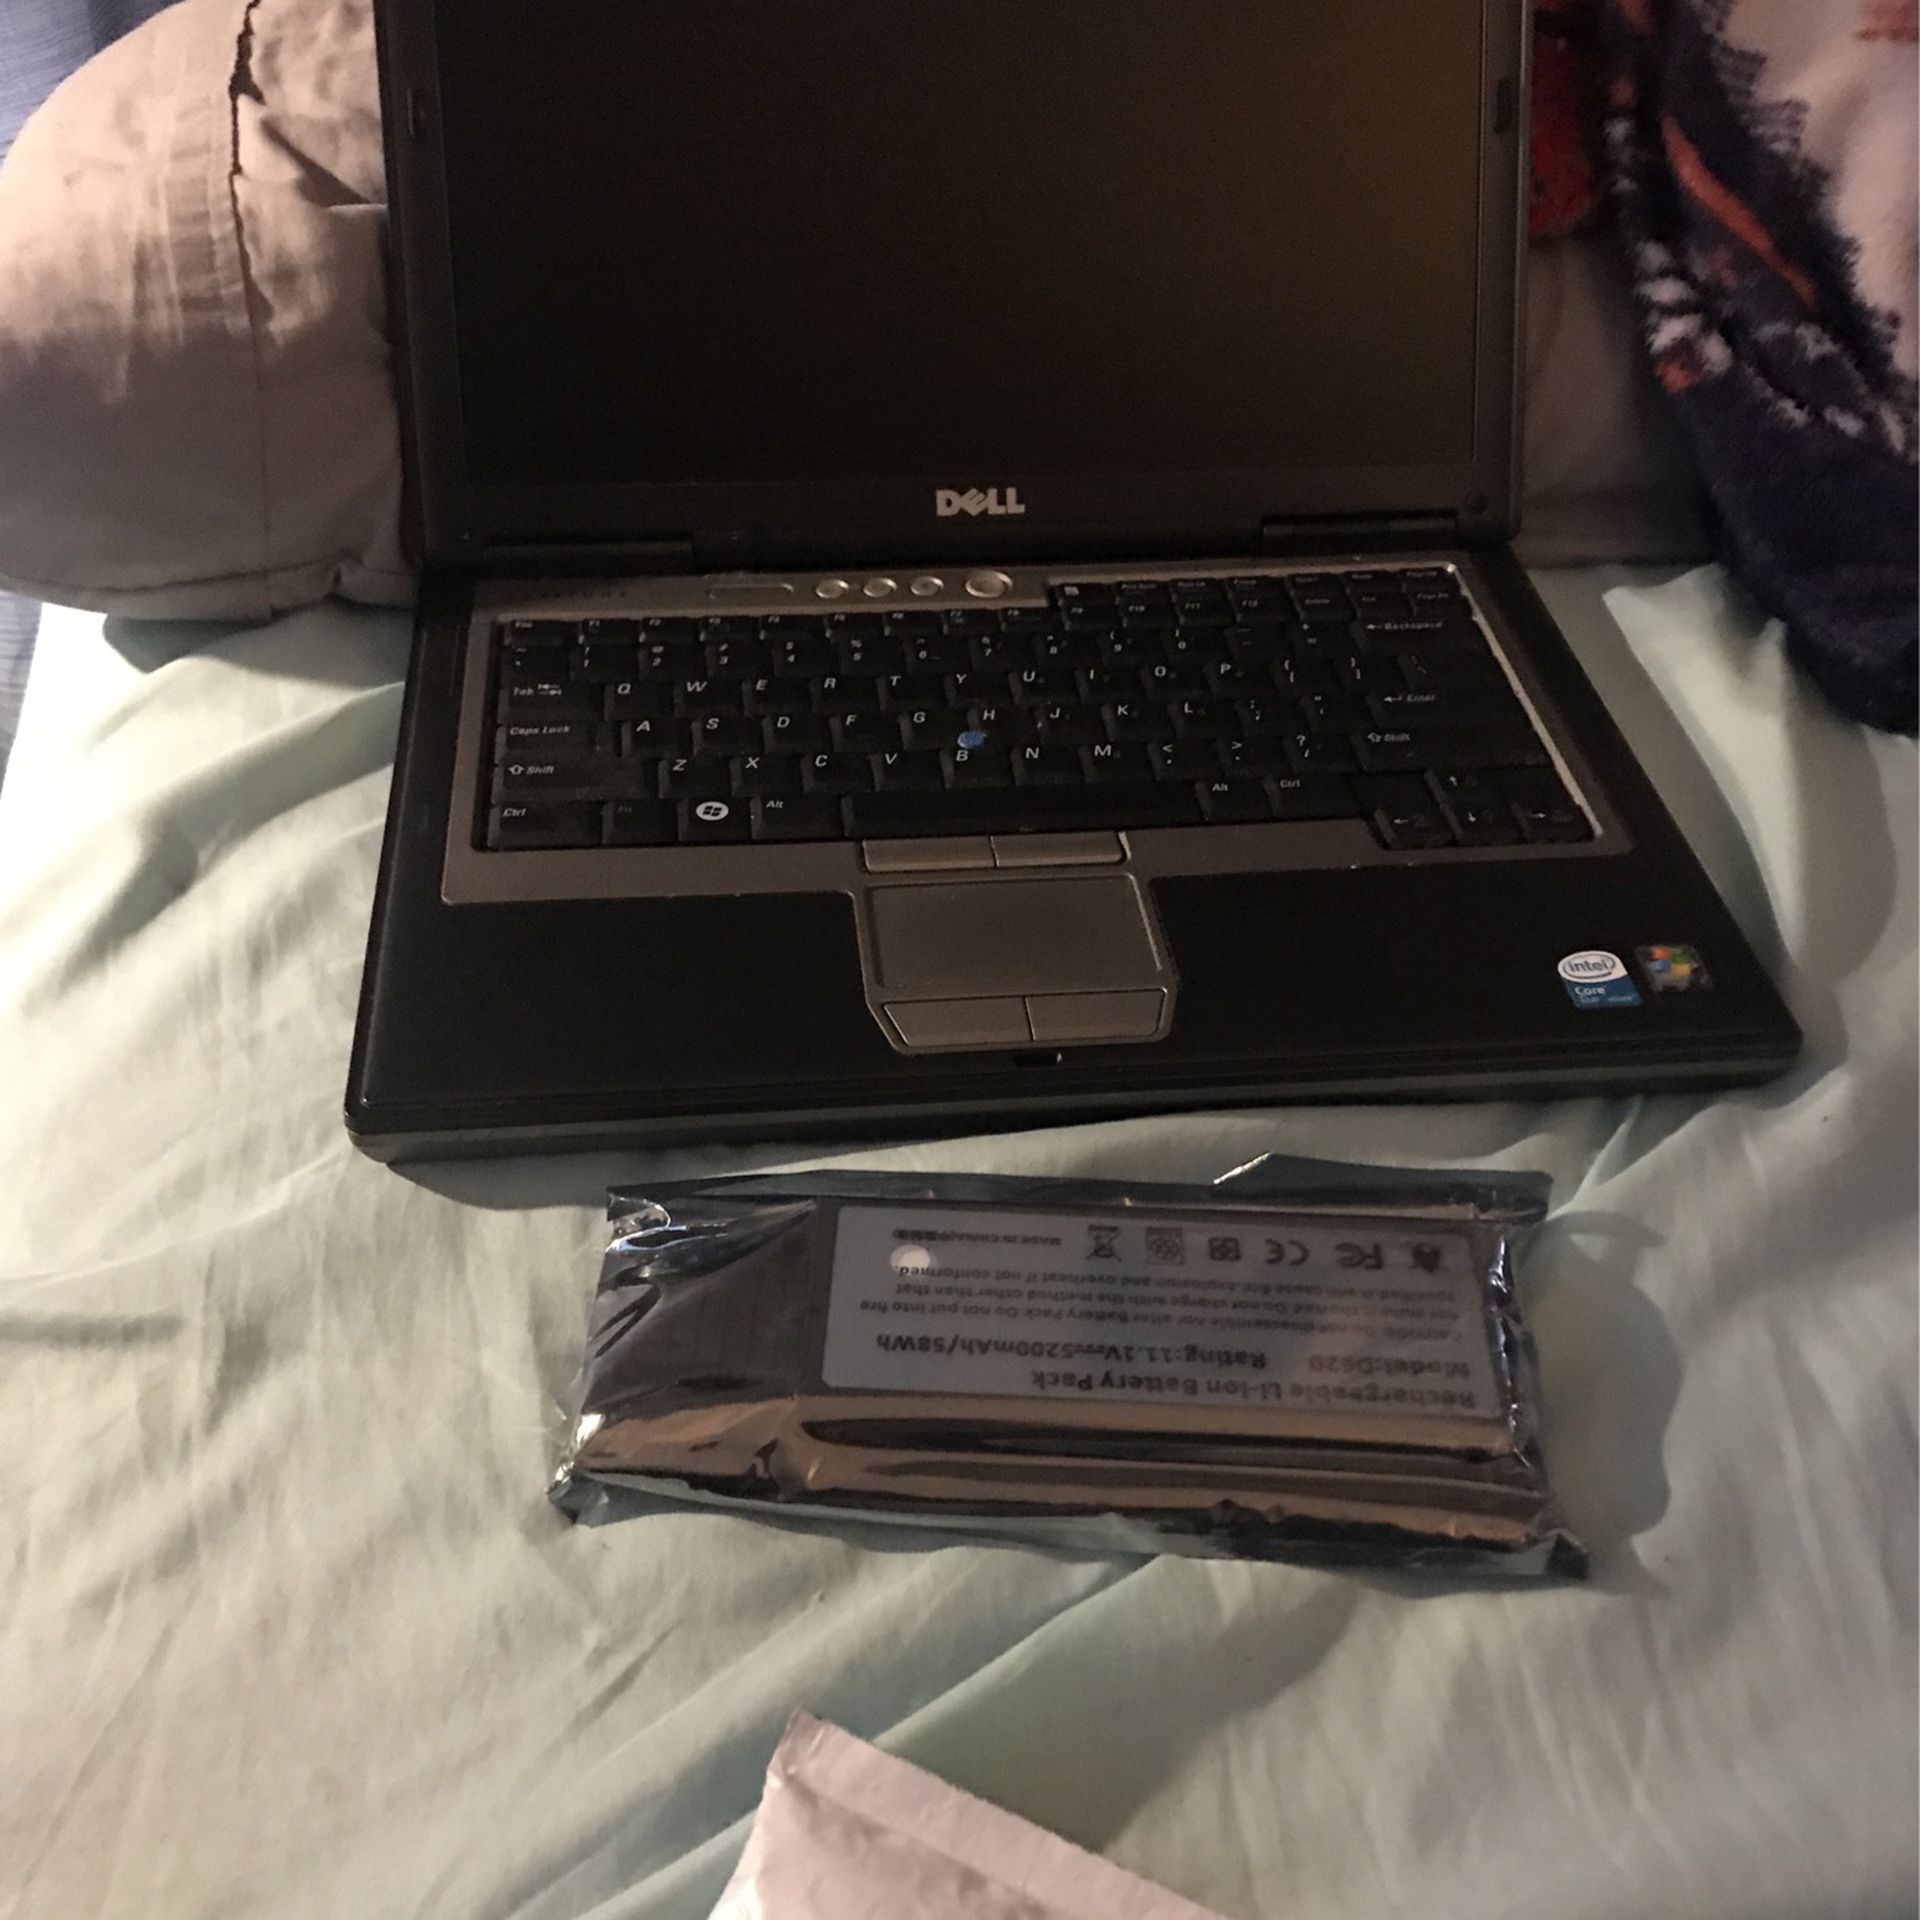 Dell Laptop With Backup And Changer